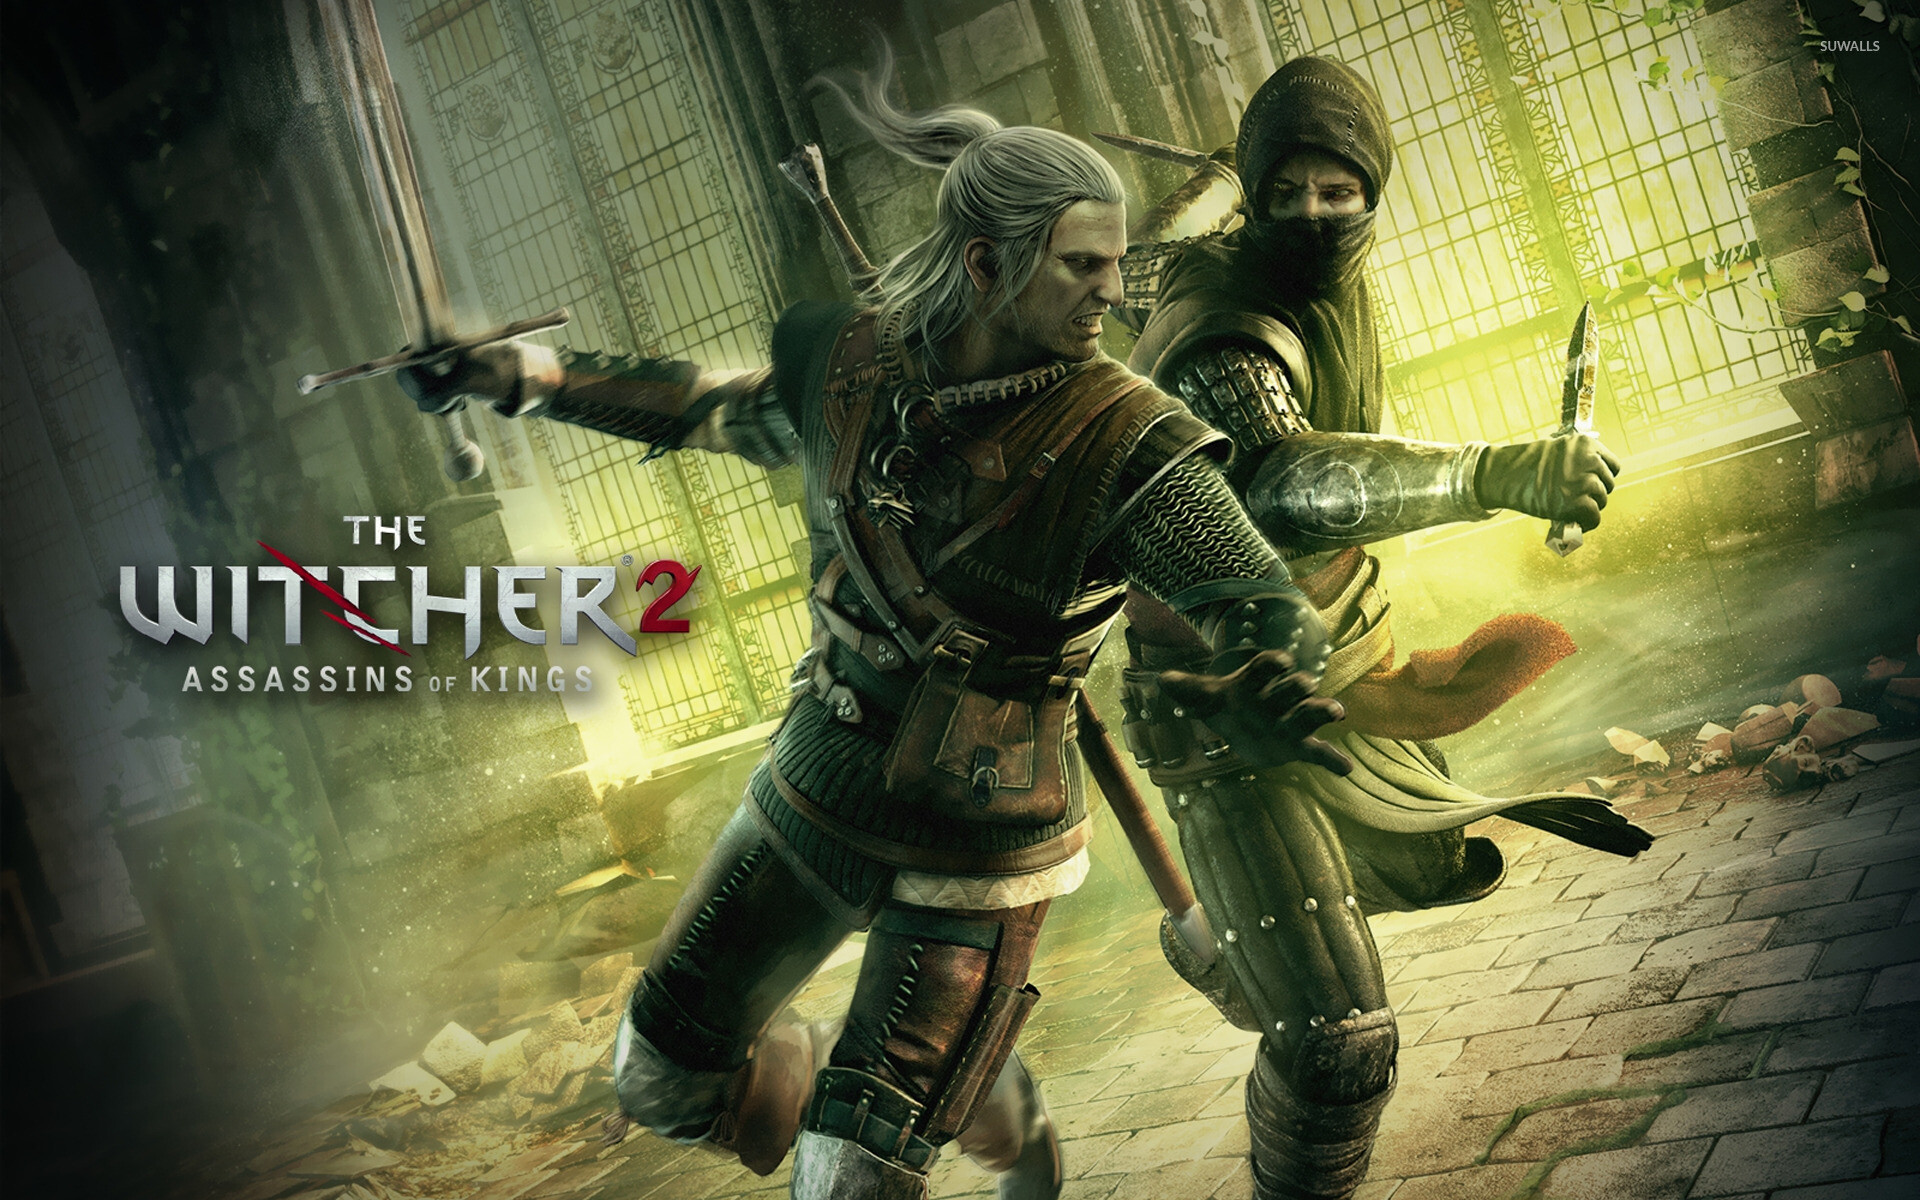 The Witcher (Game): Assassins of Kings, The second main installment in The Witcher's series. 1920x1200 HD Wallpaper.